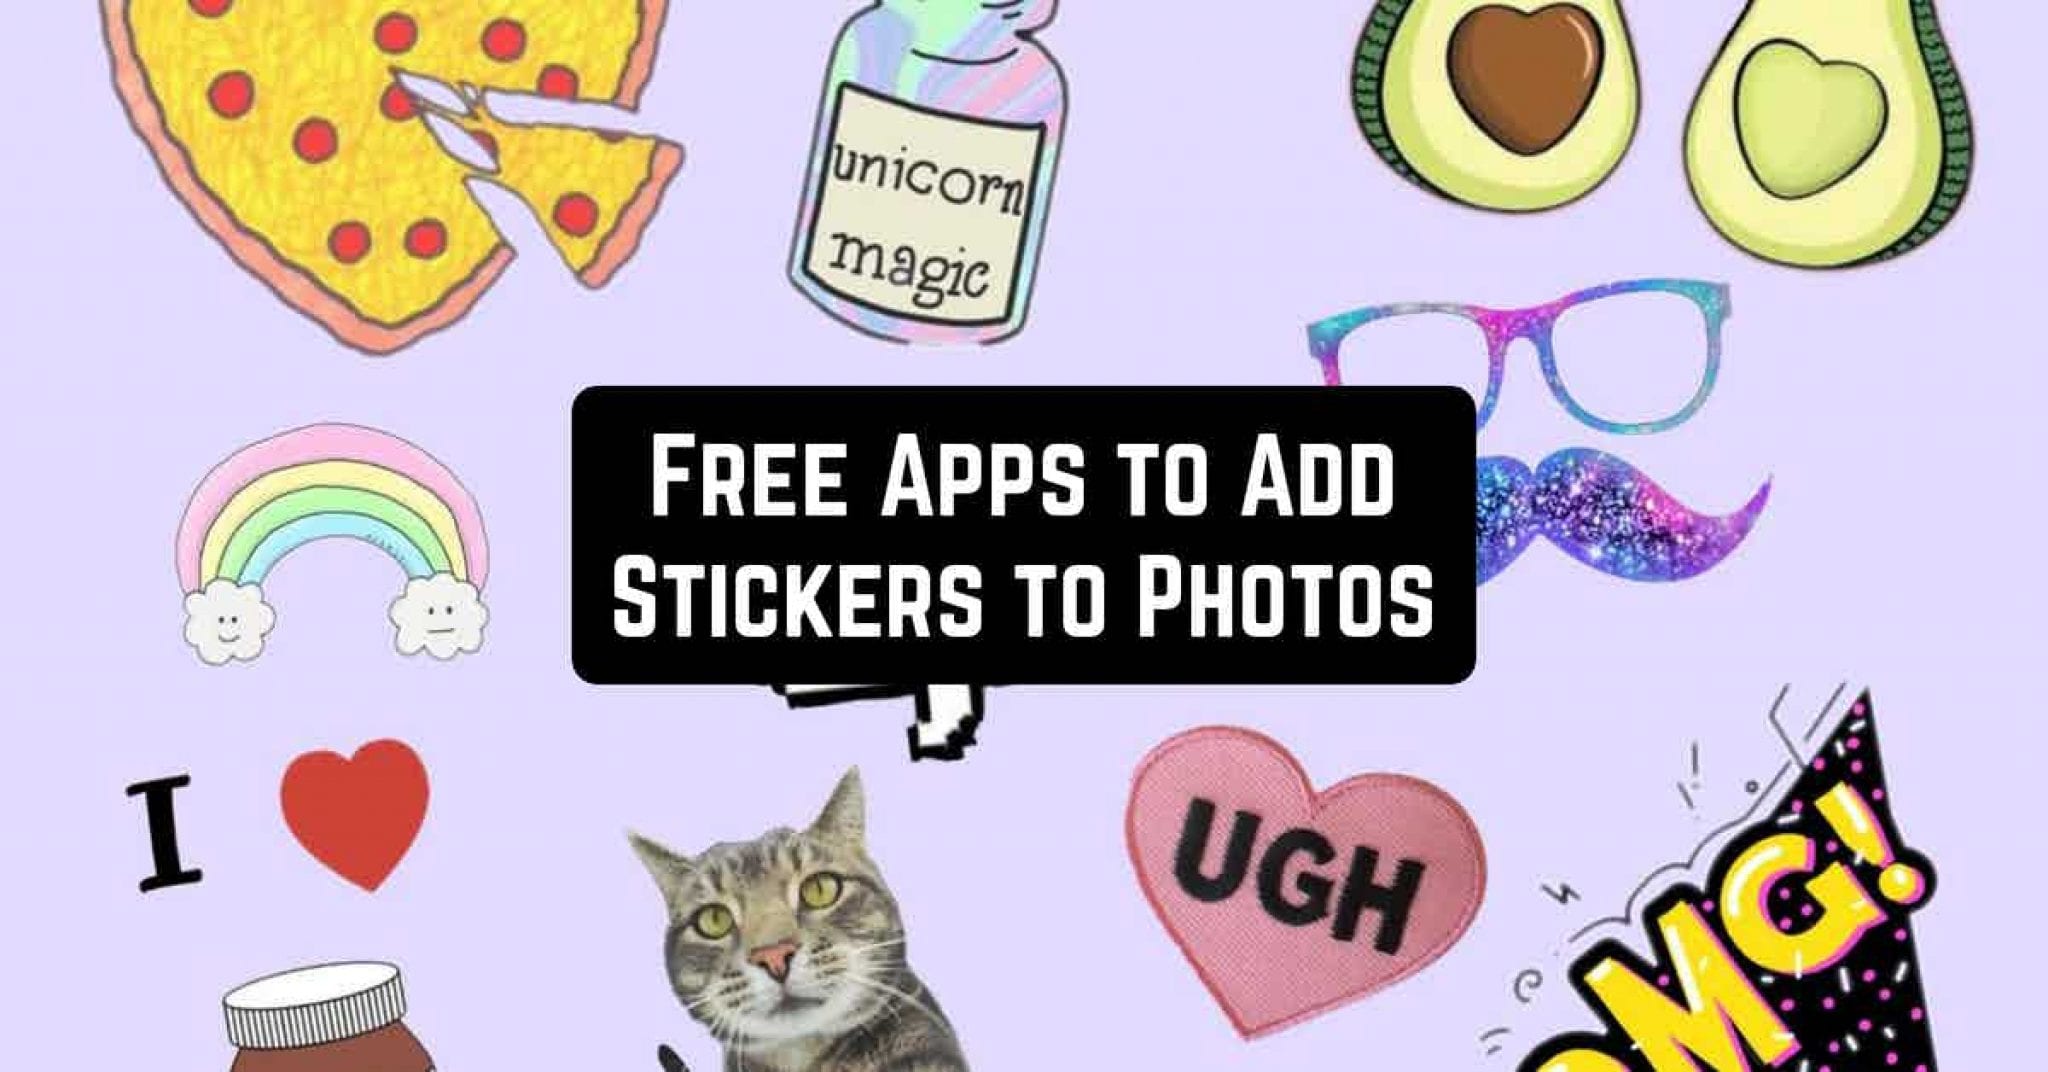 11 Free Apps to Add Stickers to Photos on Android & iOS | Free apps for ...